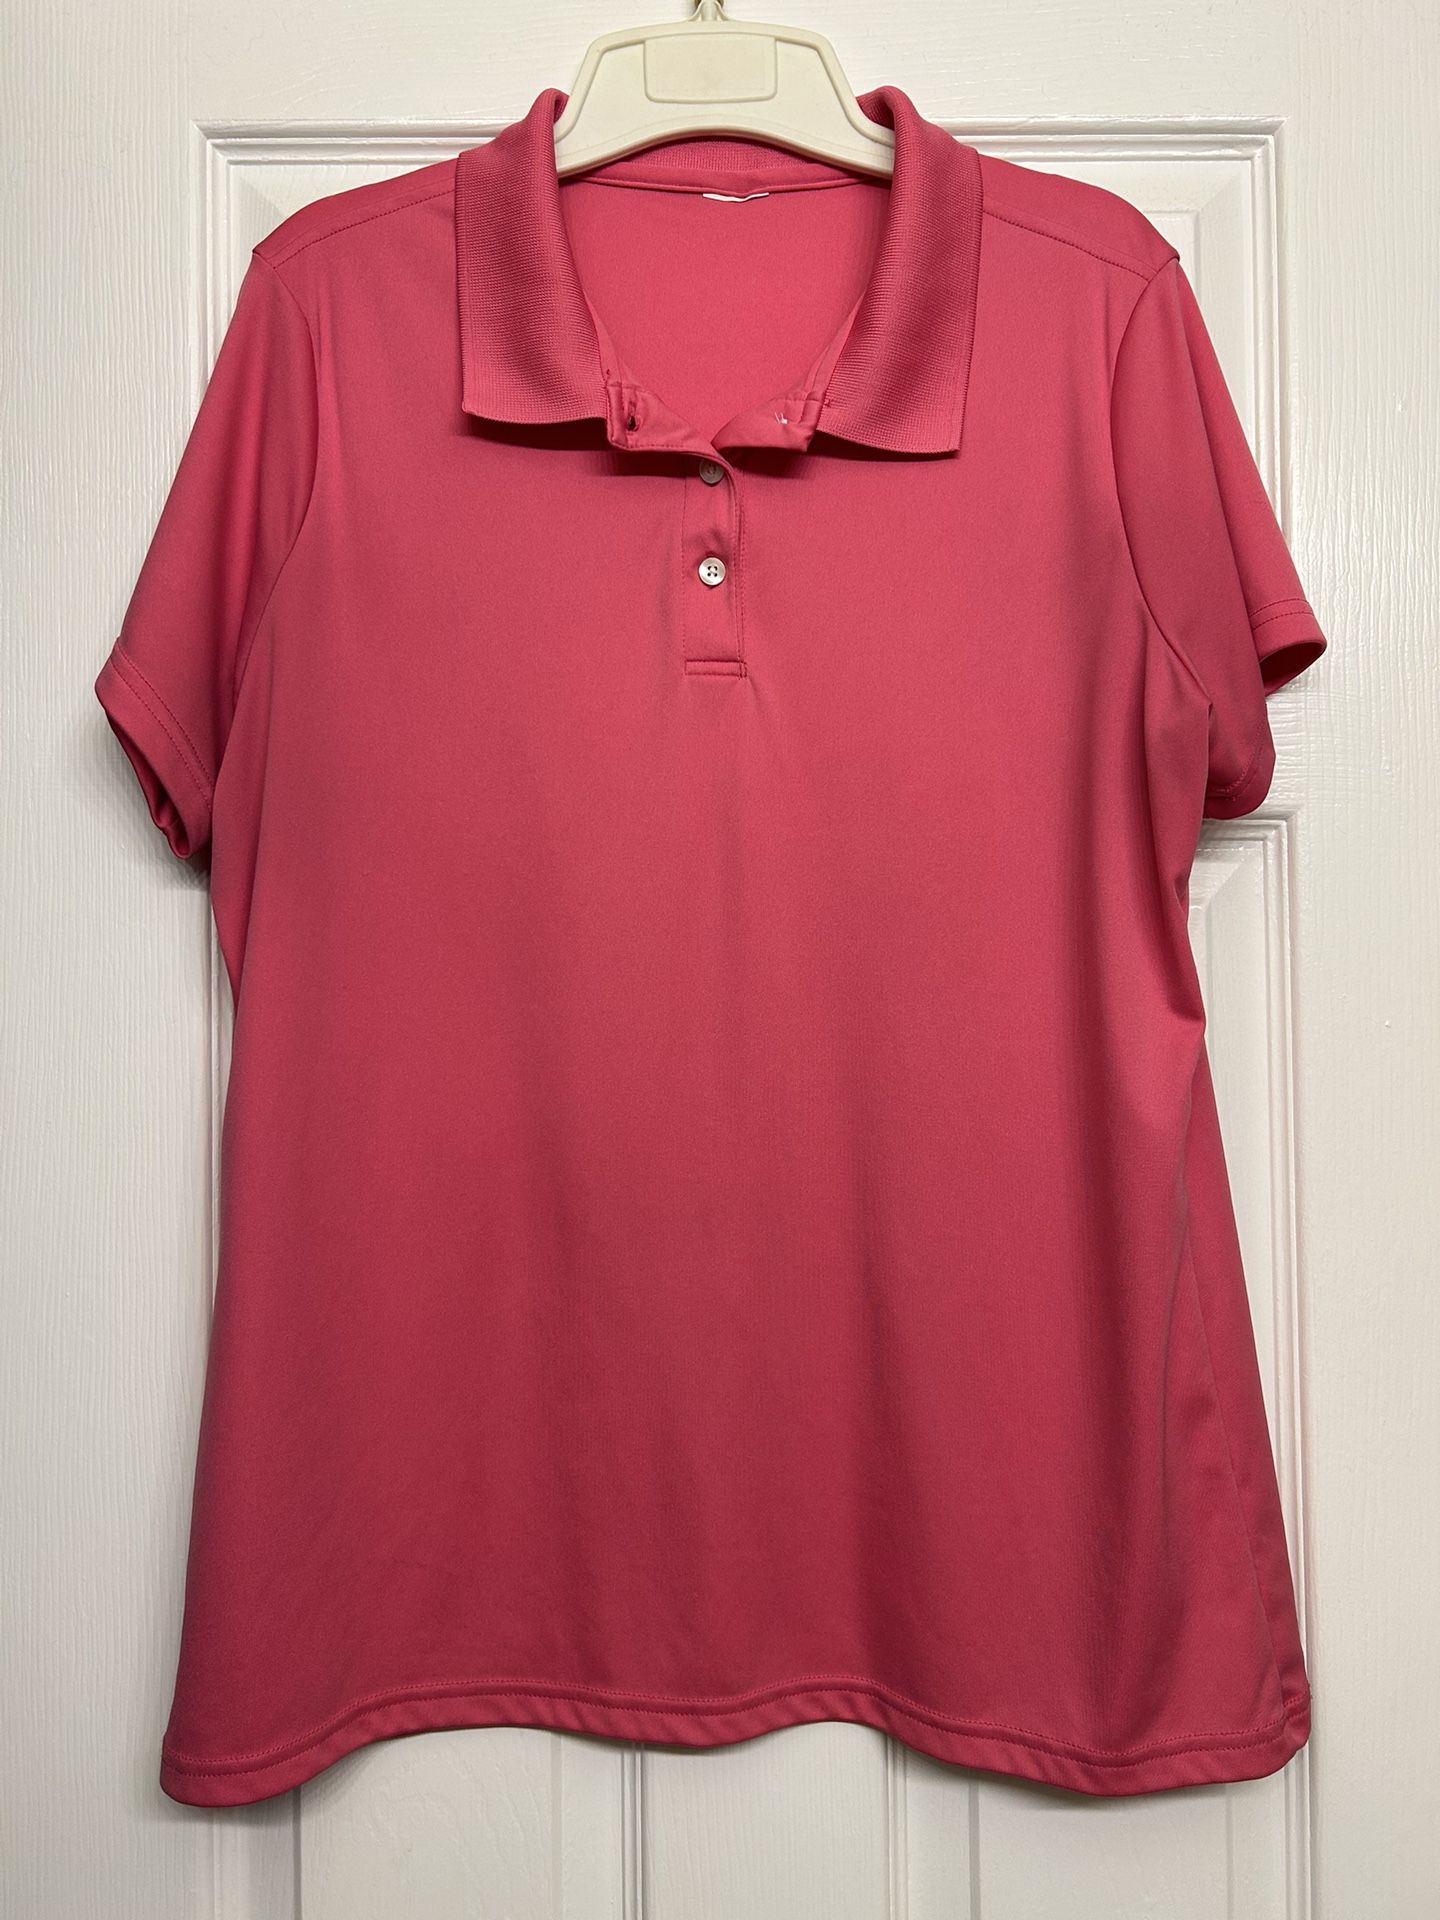 Women’s Pink Collared Polo Dress Shirt Silky Soft Size Large